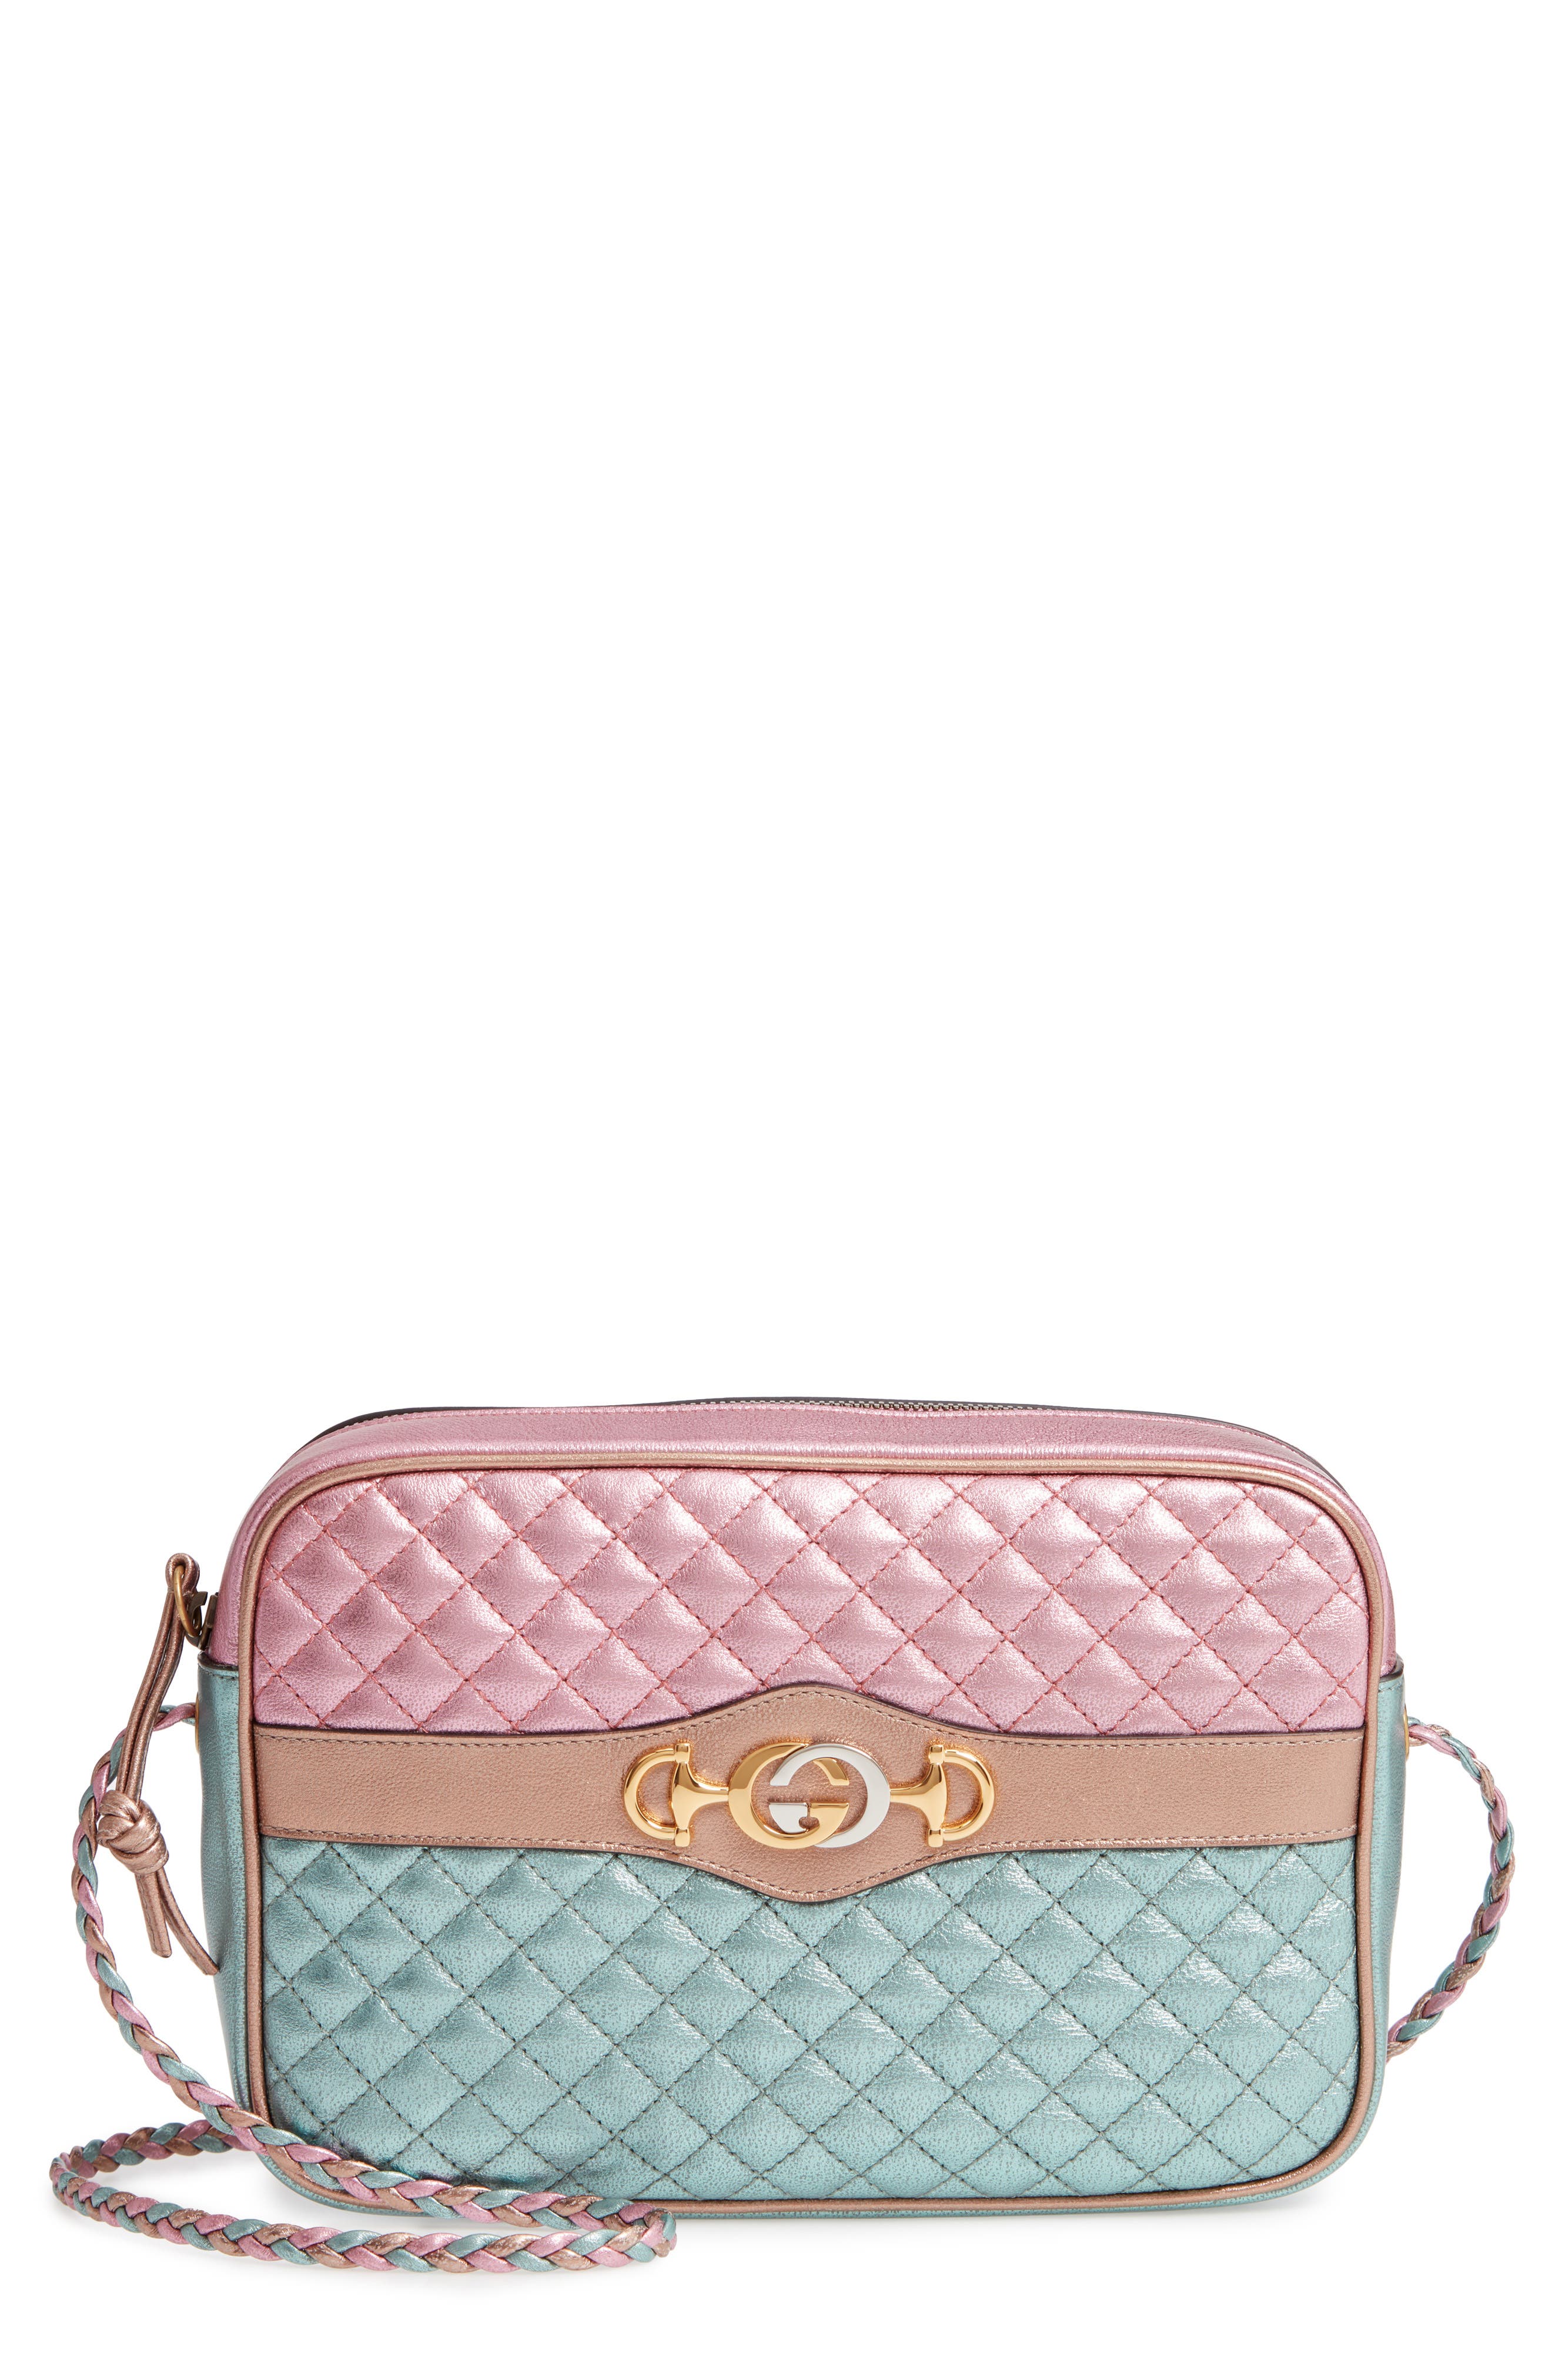 gucci bag quilted